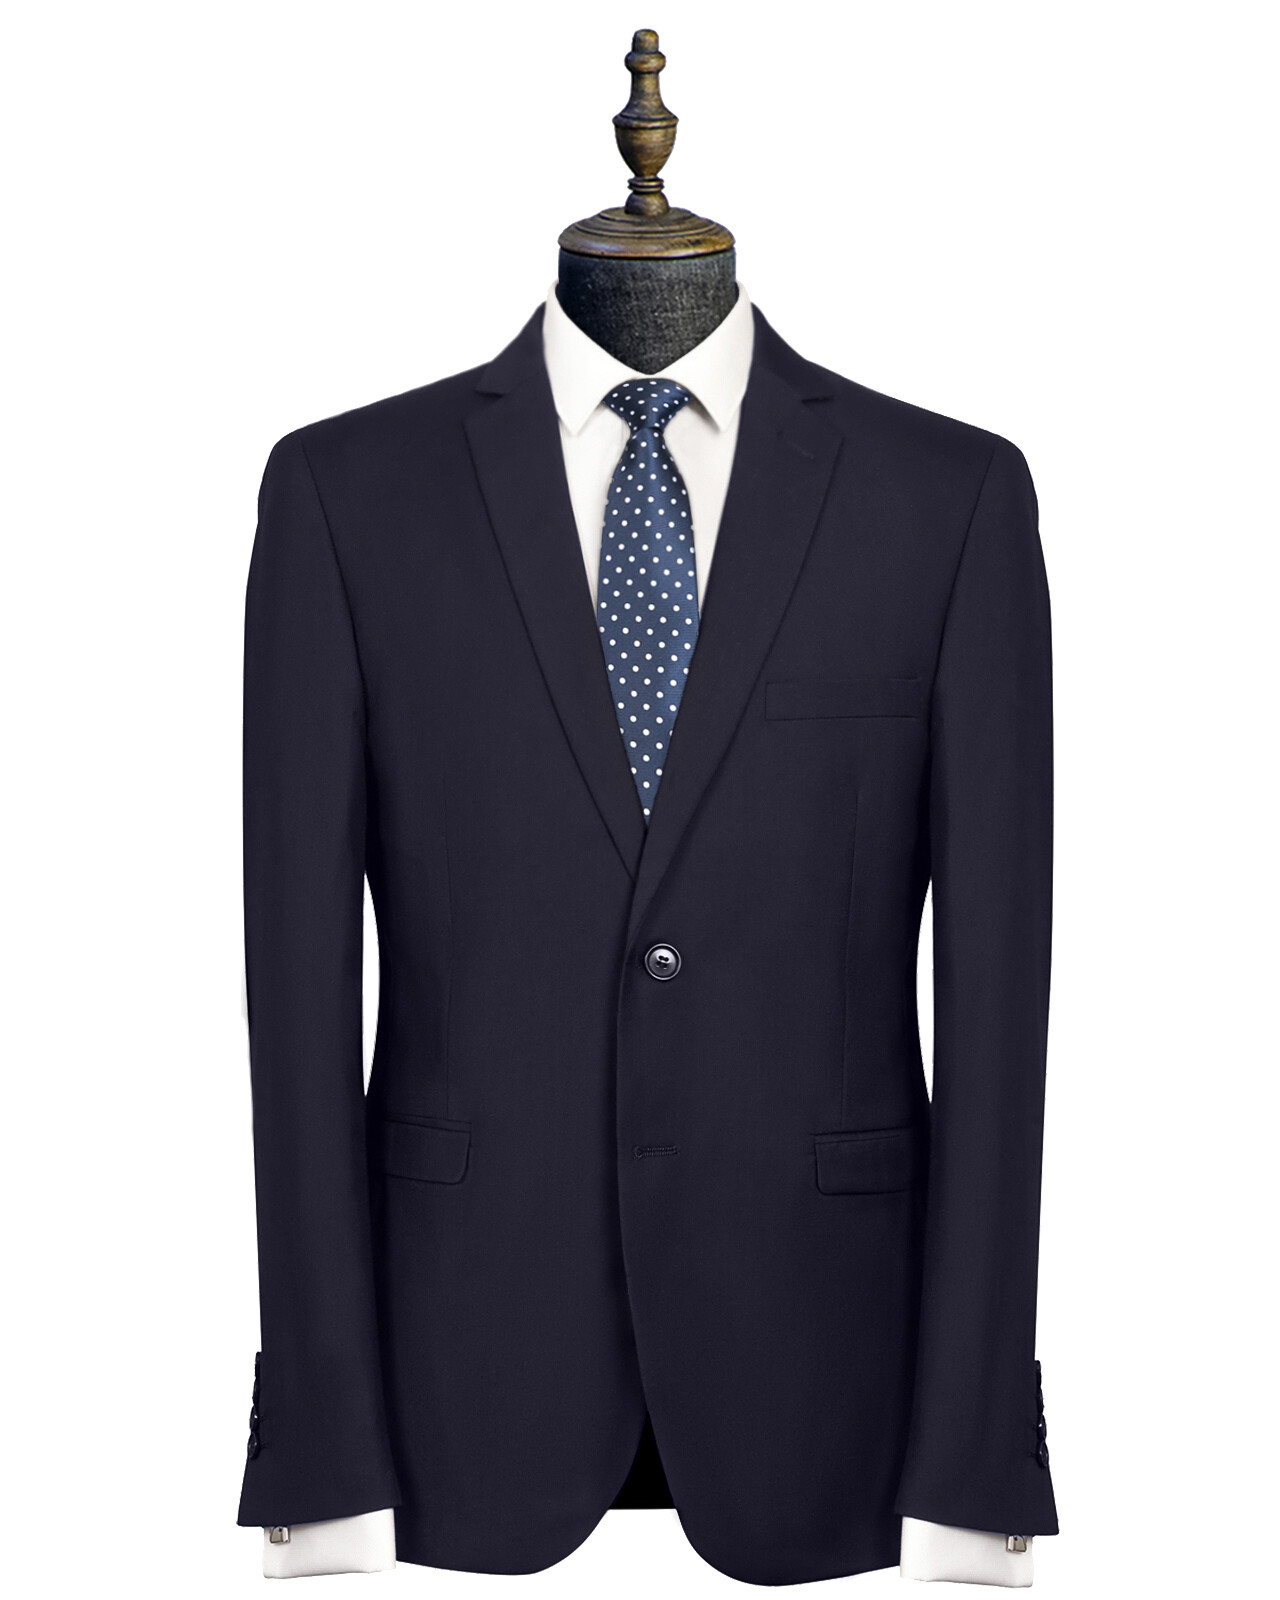 Entry level skinny-fit navy suit made from a non-wool fabric